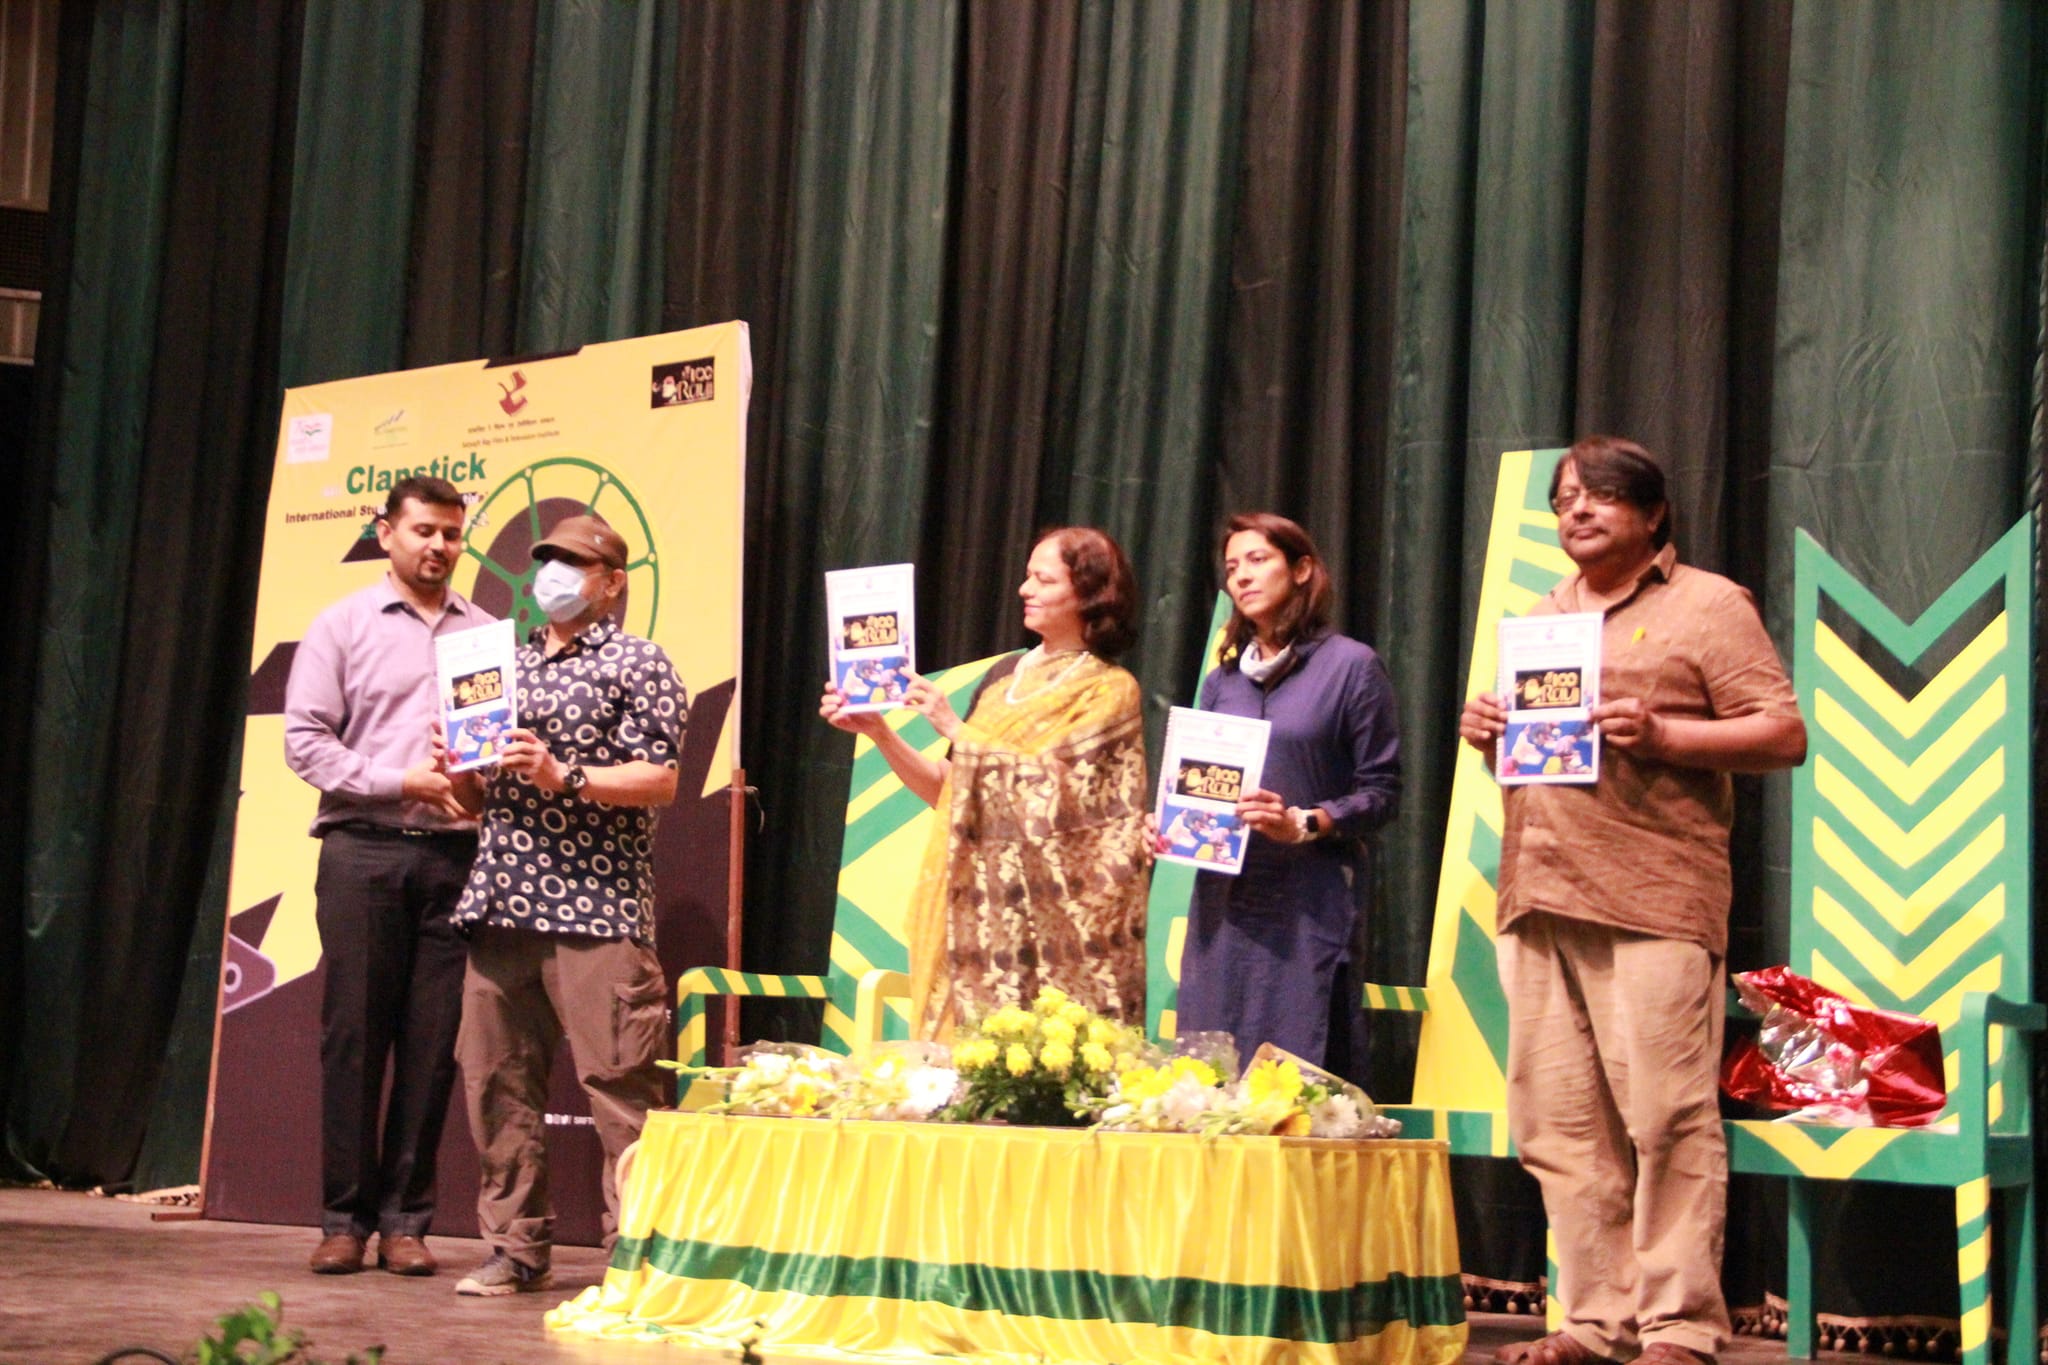 Addl Secy launching activity book